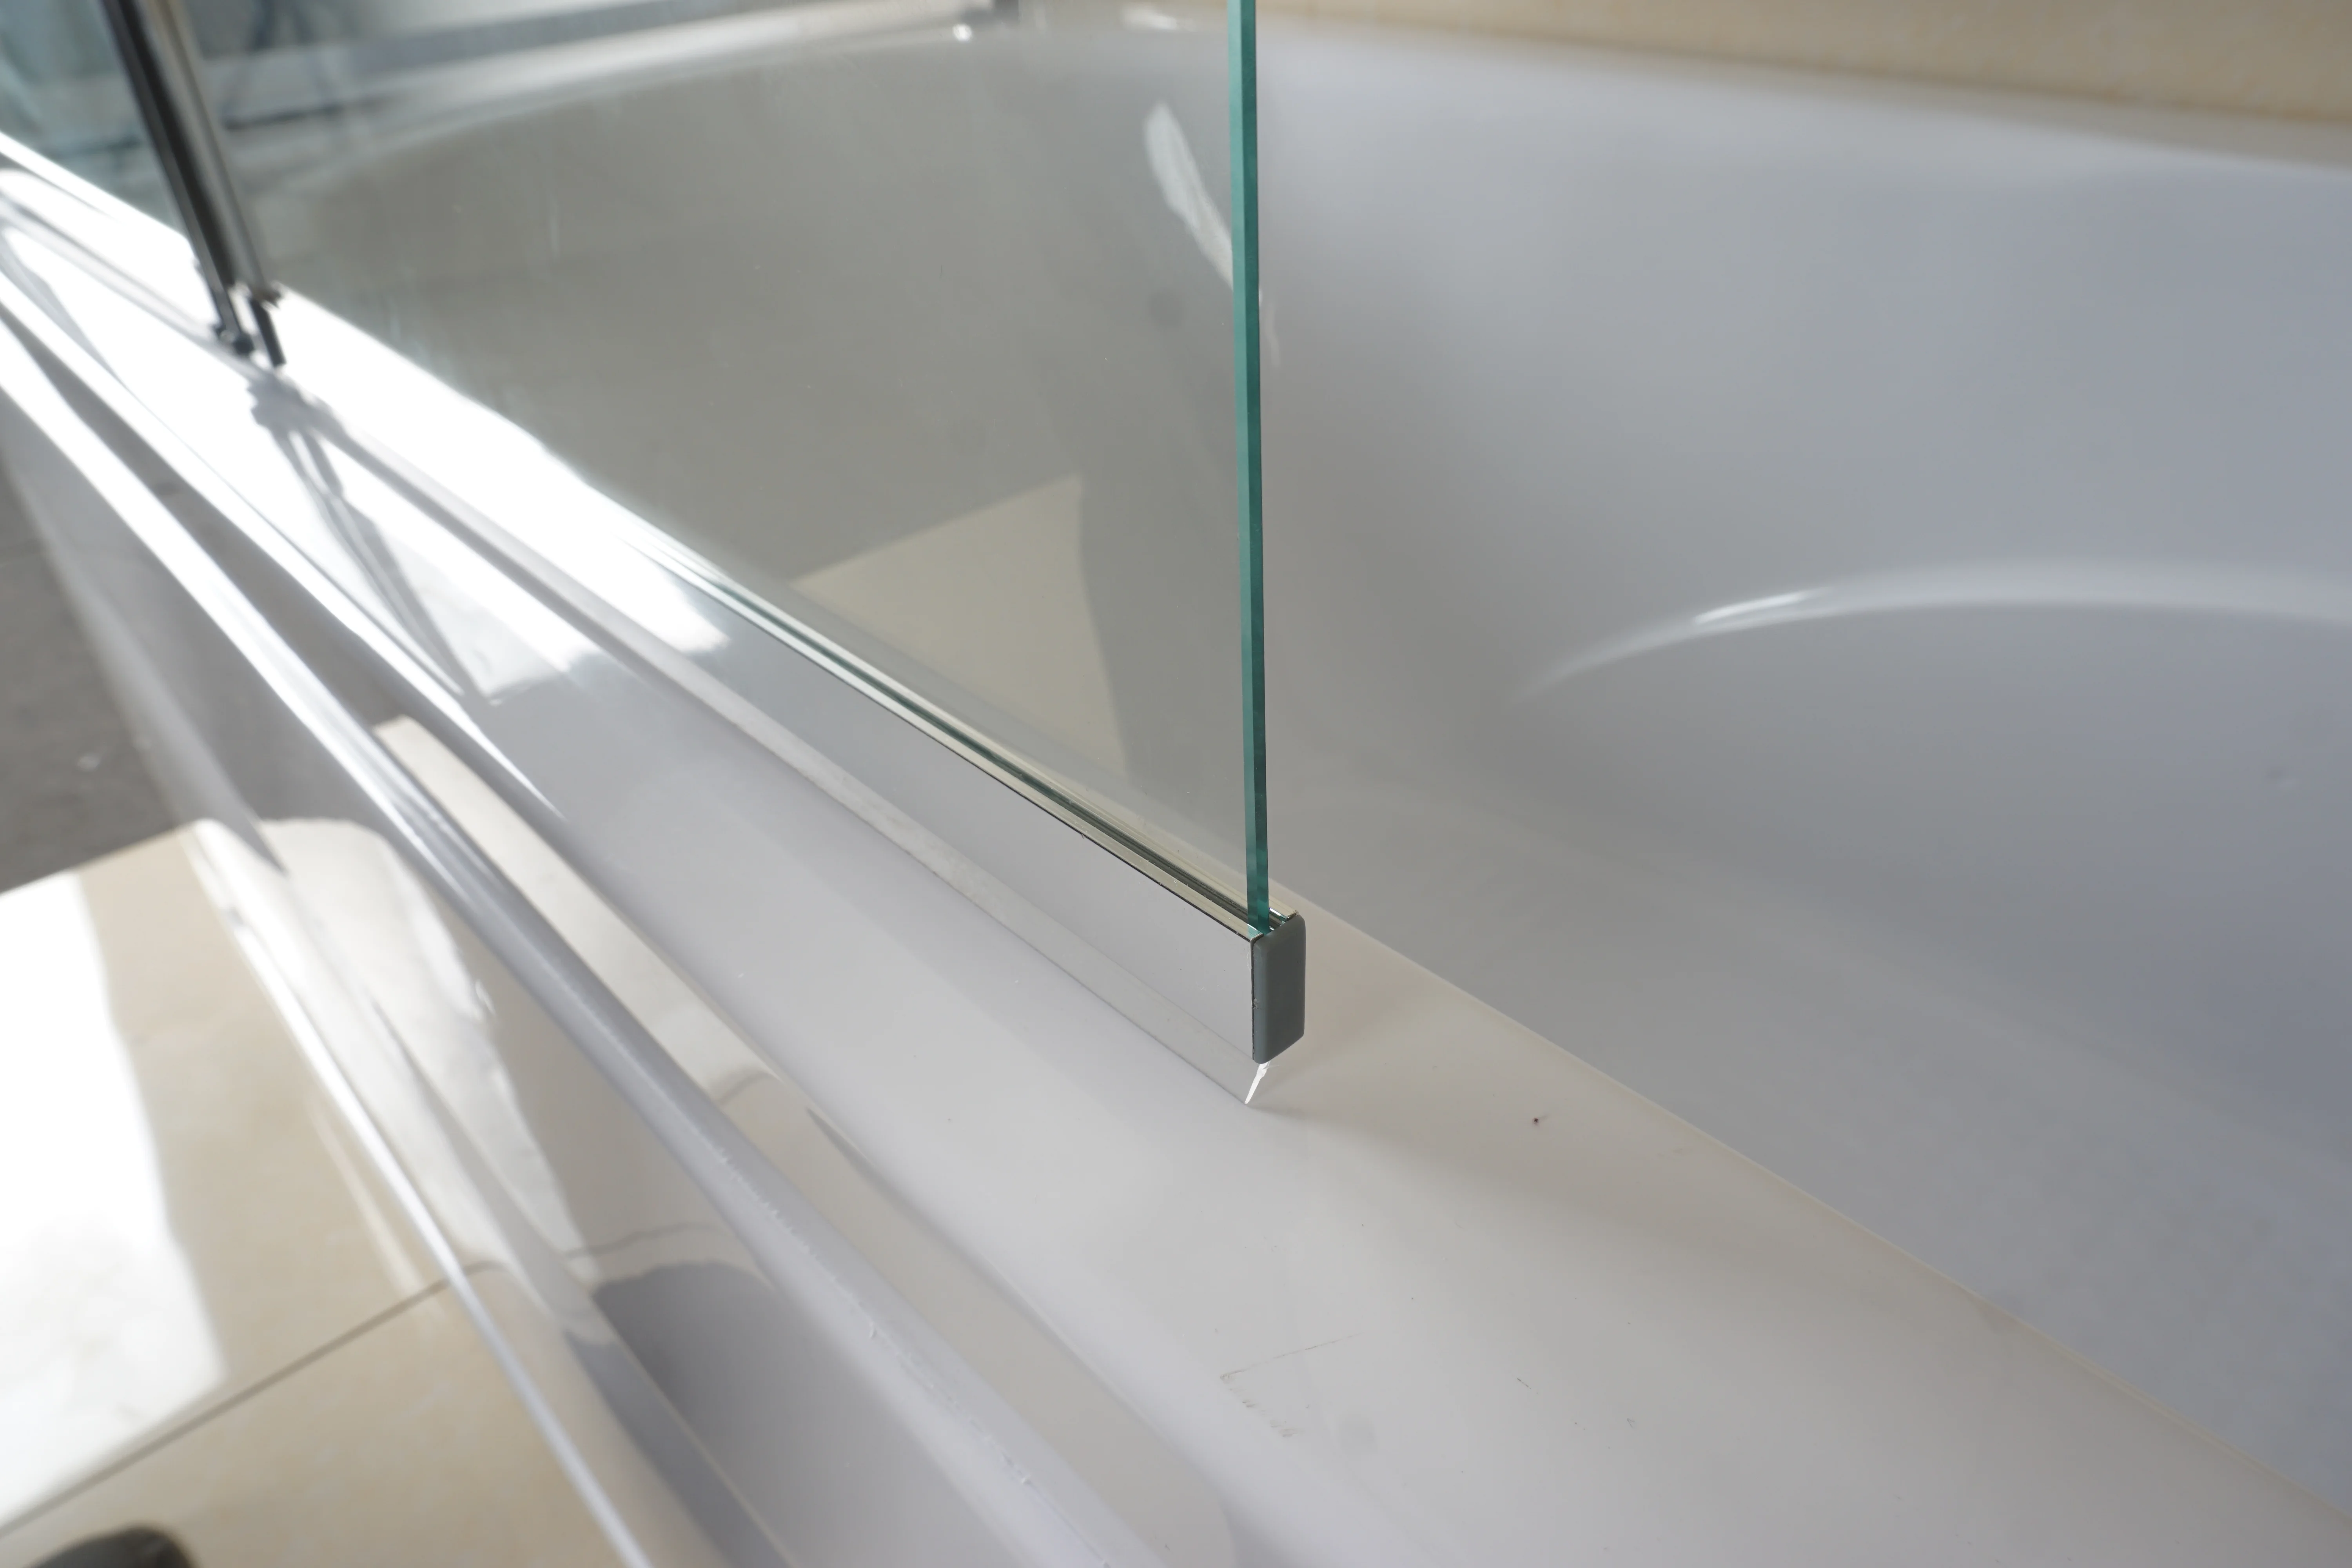 
3 folded free style 4mm safety Glass Shower Bathtub Screen free standing HOT online selling model 